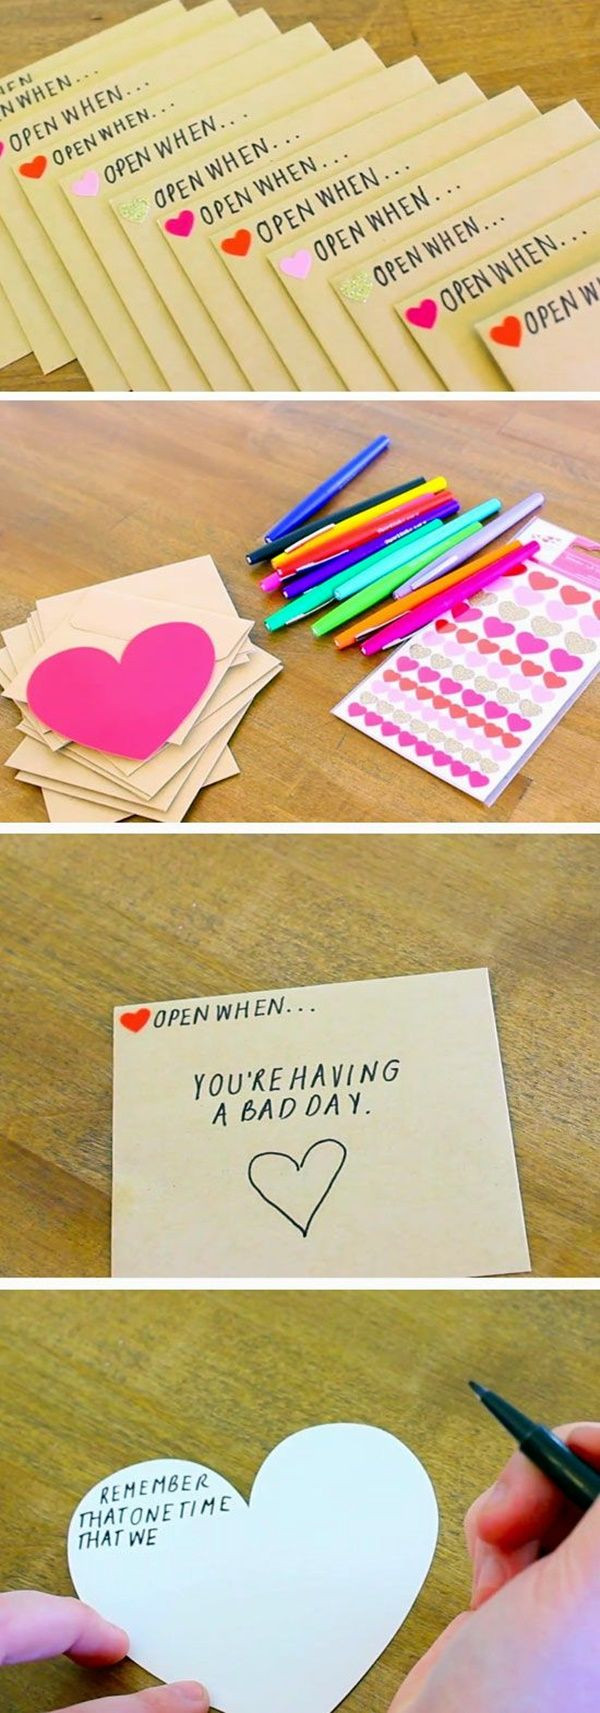 Cute Homemade Valentines Day Gifts
 101 Homemade Valentines Day Ideas for Him that re really